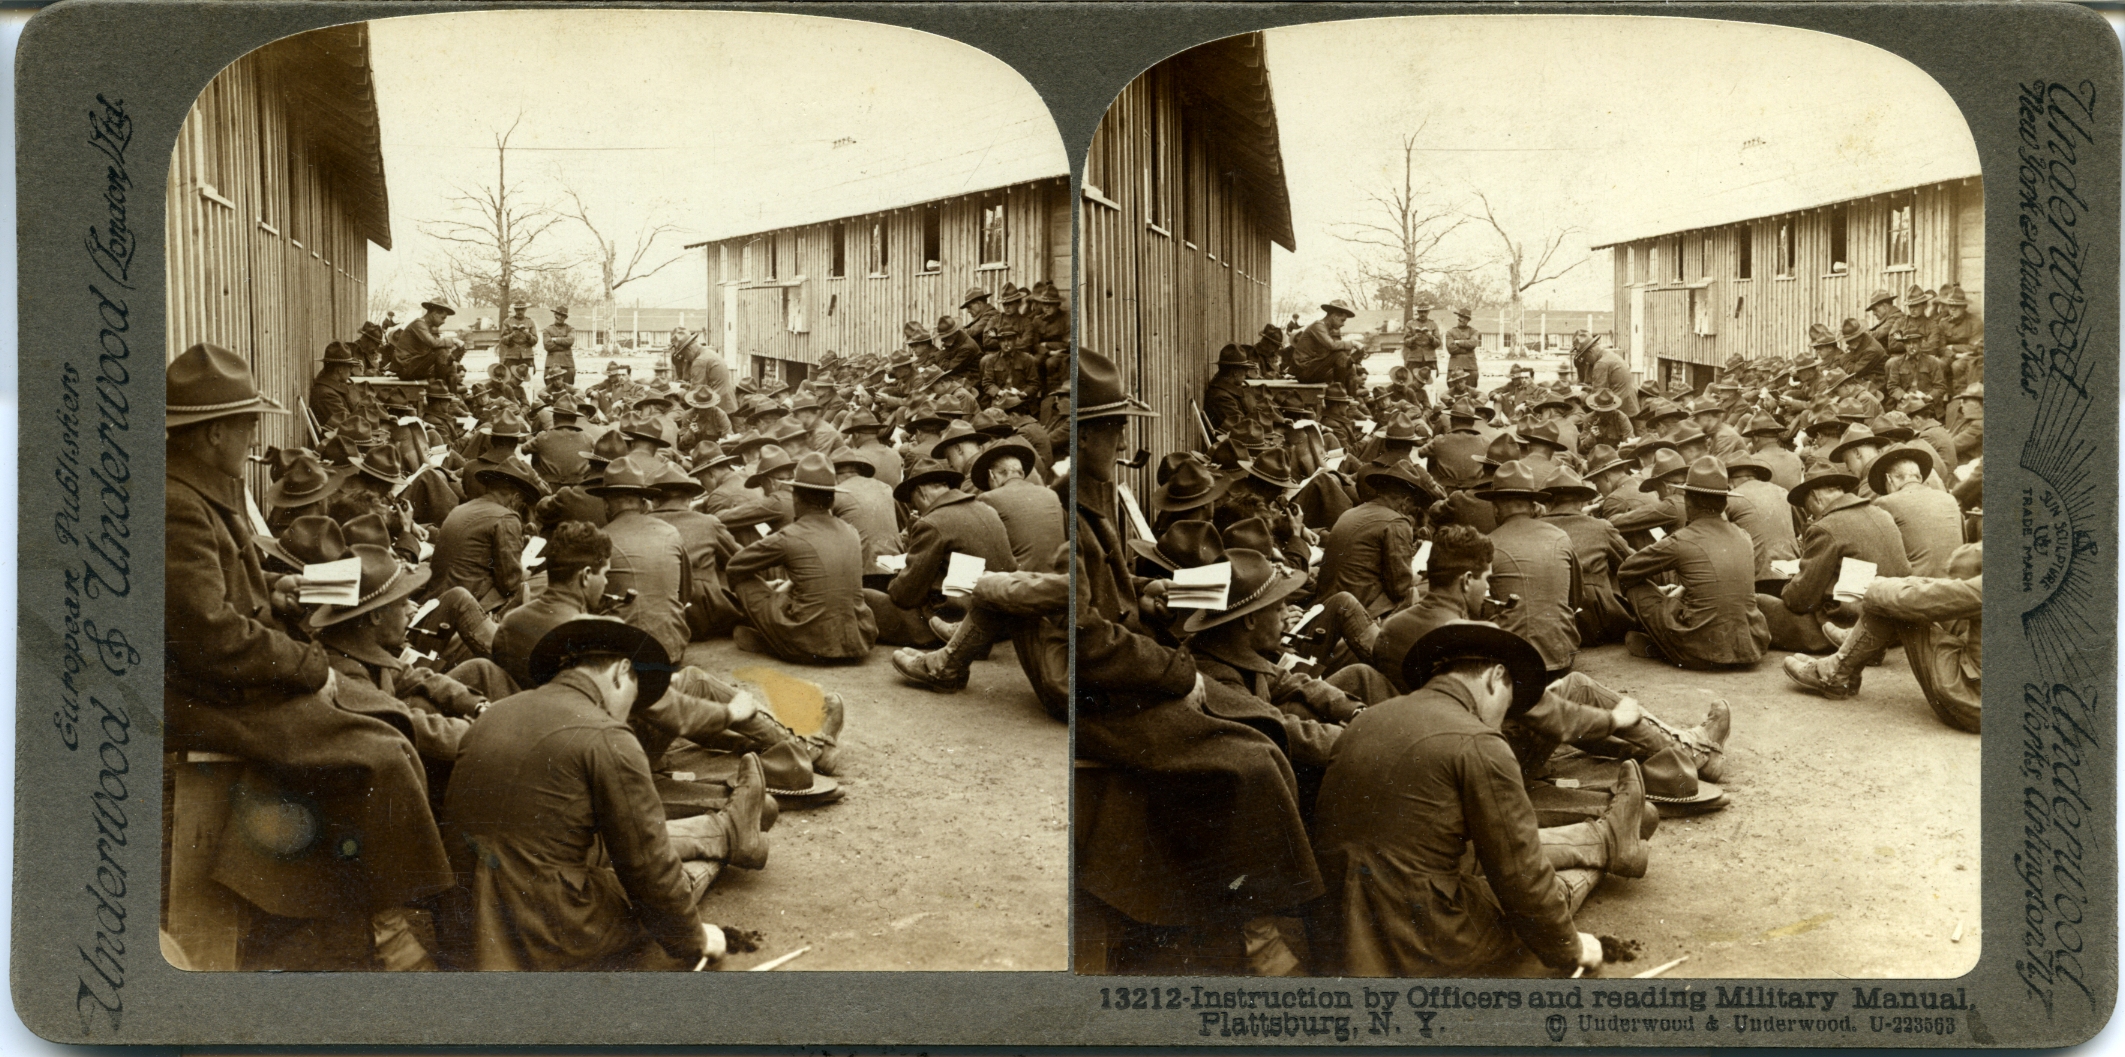 Instruction by officers and reading Military Manual, Plattsburg, N.Y.